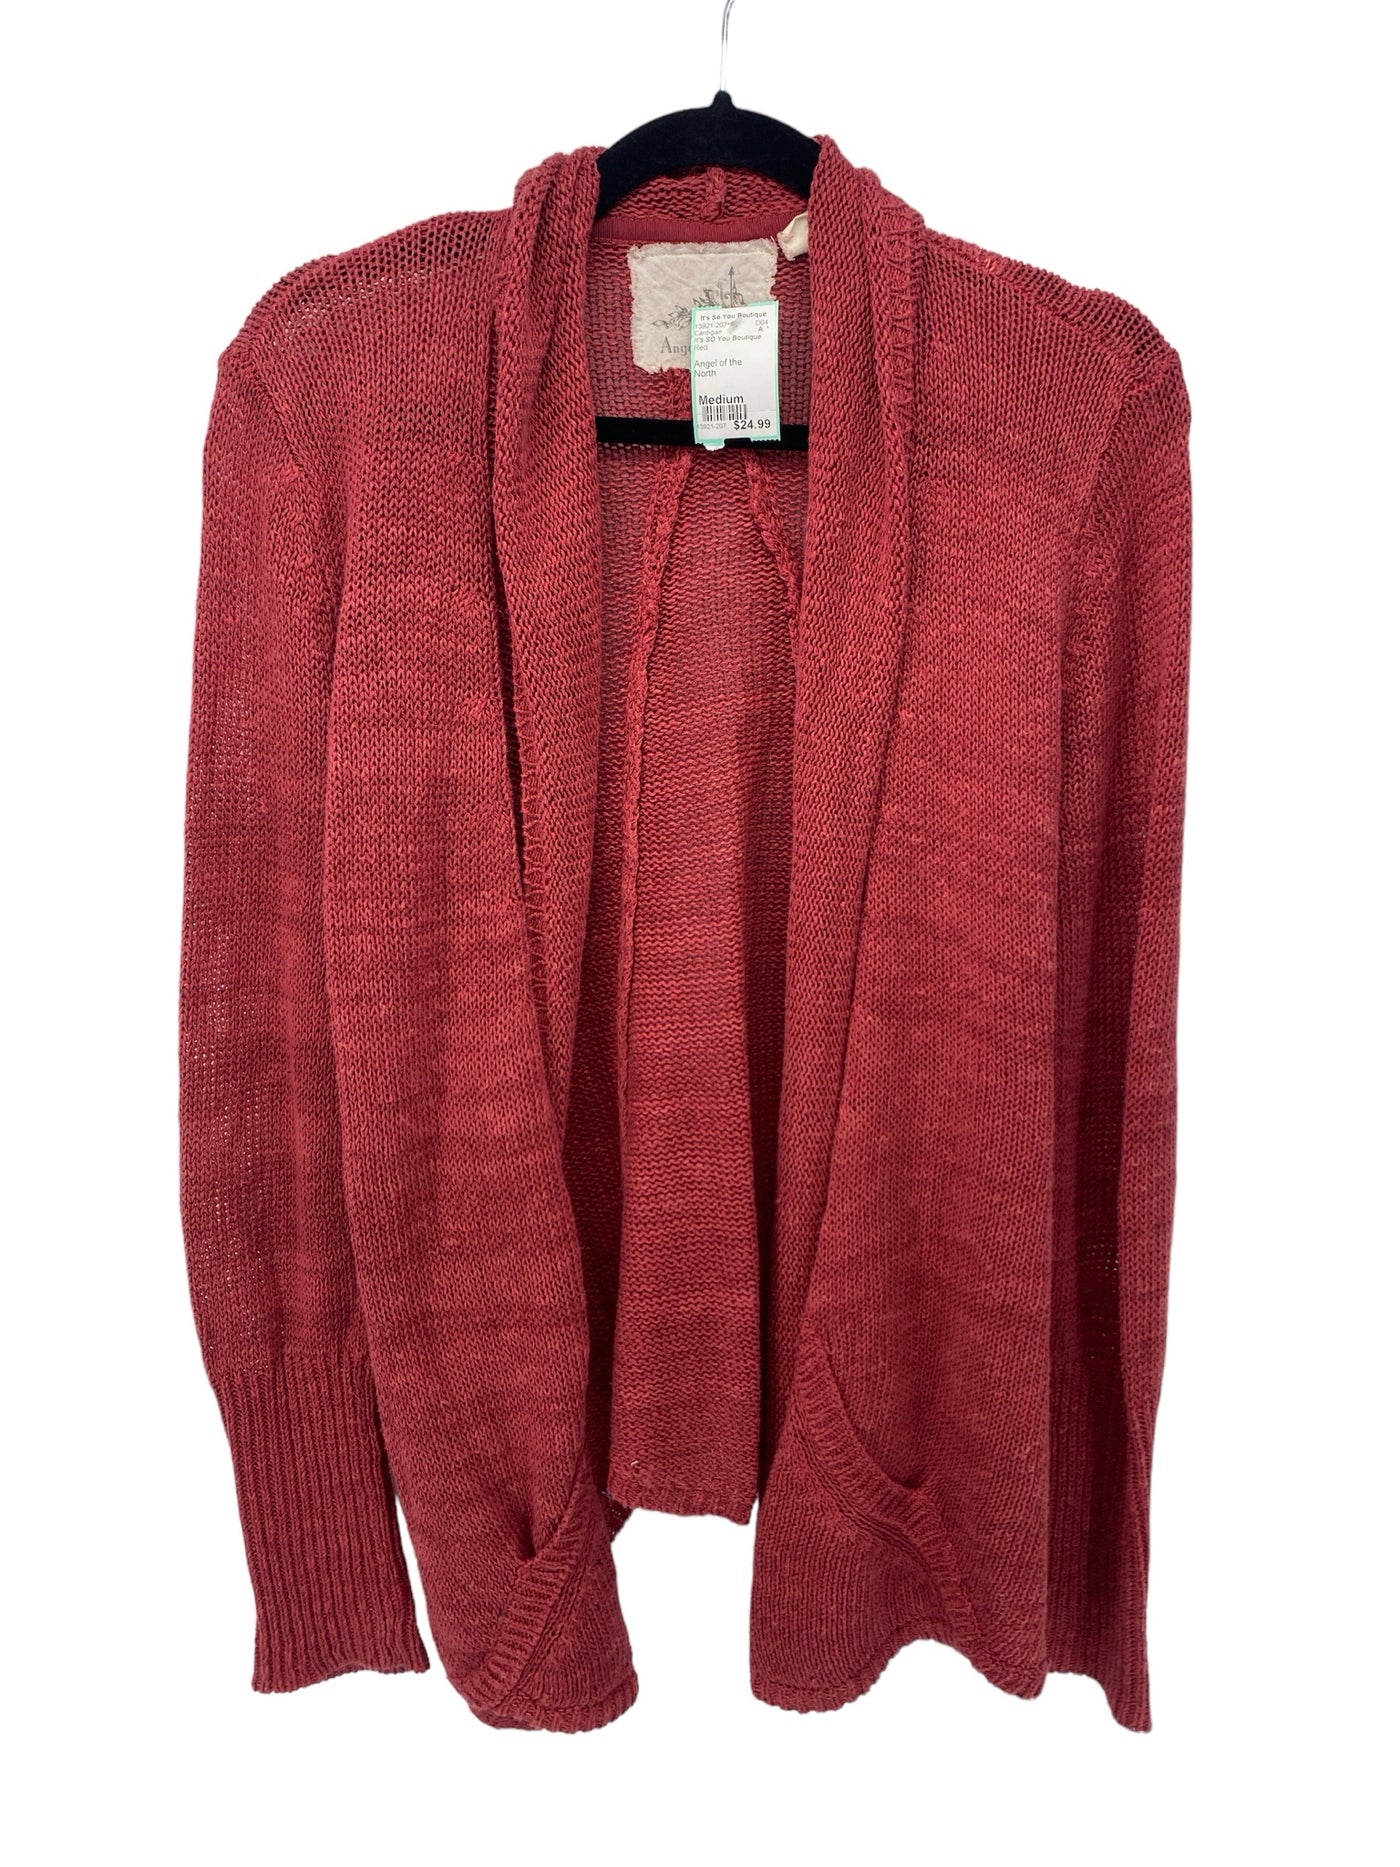 It's SO You Boutique Misses Size Medium Red Cardigan